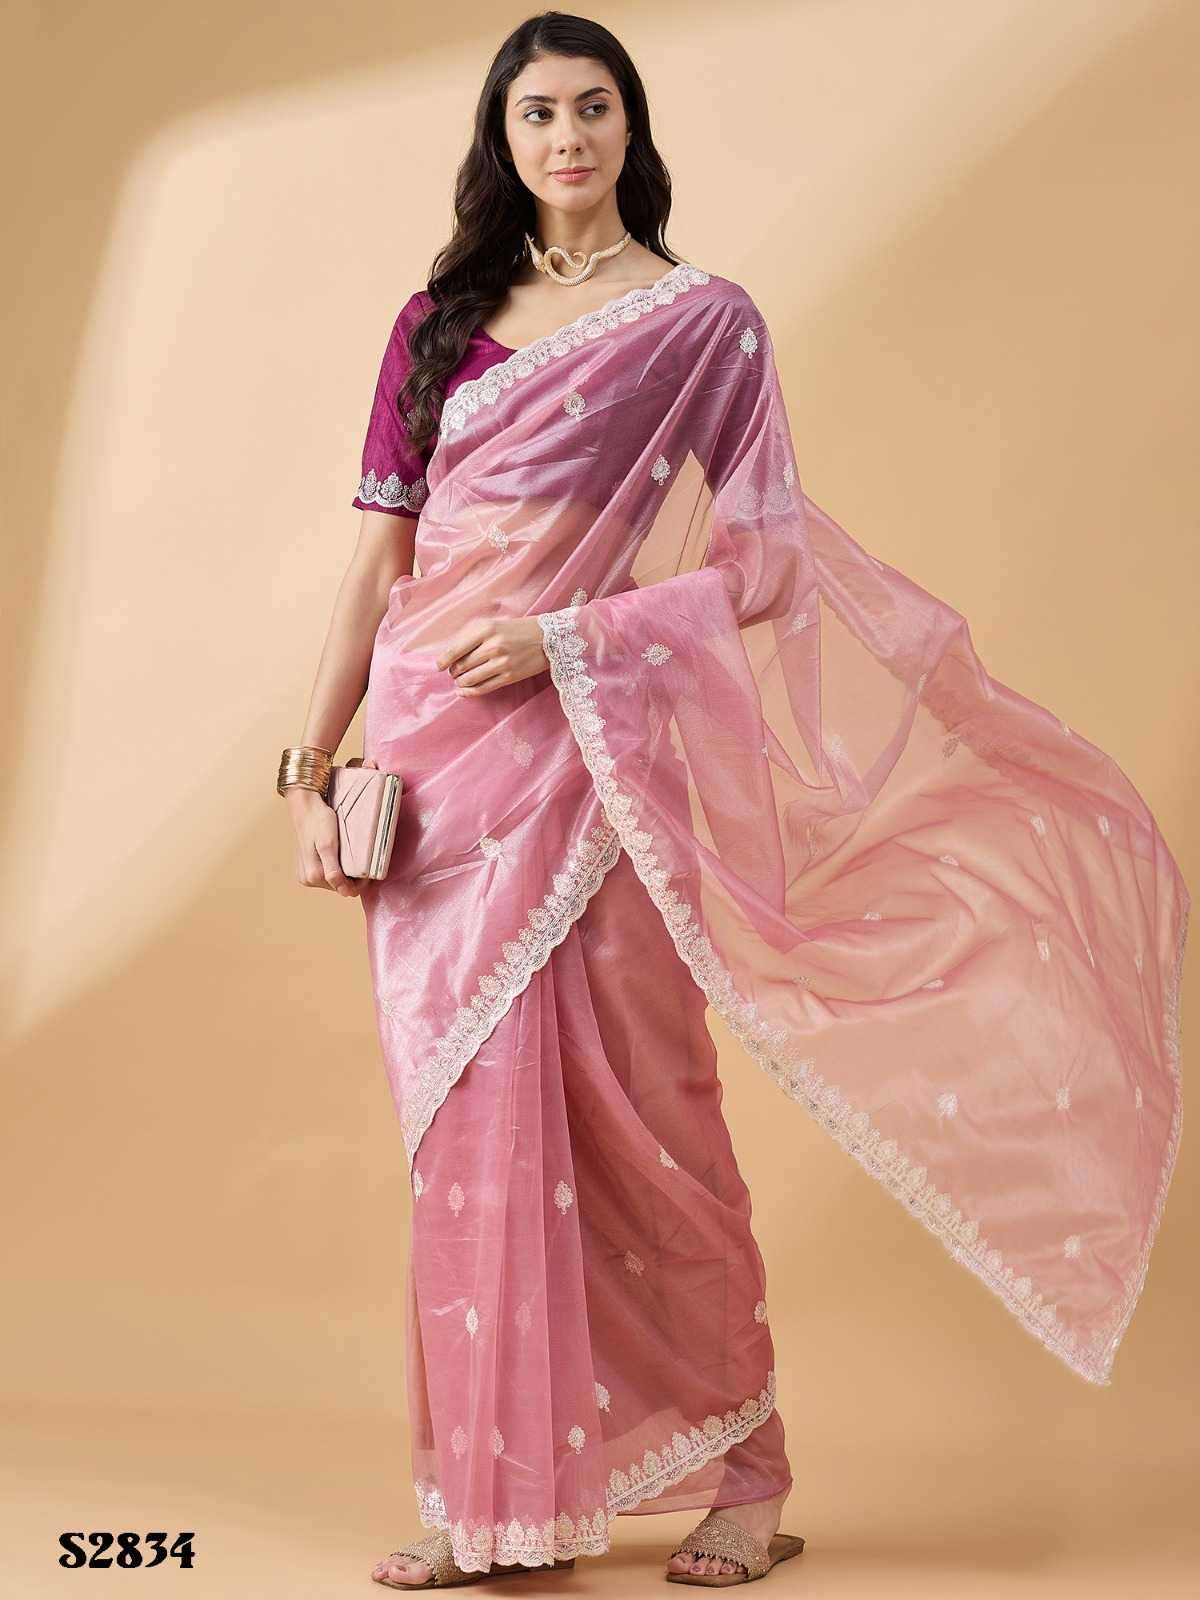 SATYA SERIES 2800 SAREE BY MAHOTSAV DESIGNER WITH WORK FANCY SAREES ARE AVAILABLE AT WHOLESALE PRICE